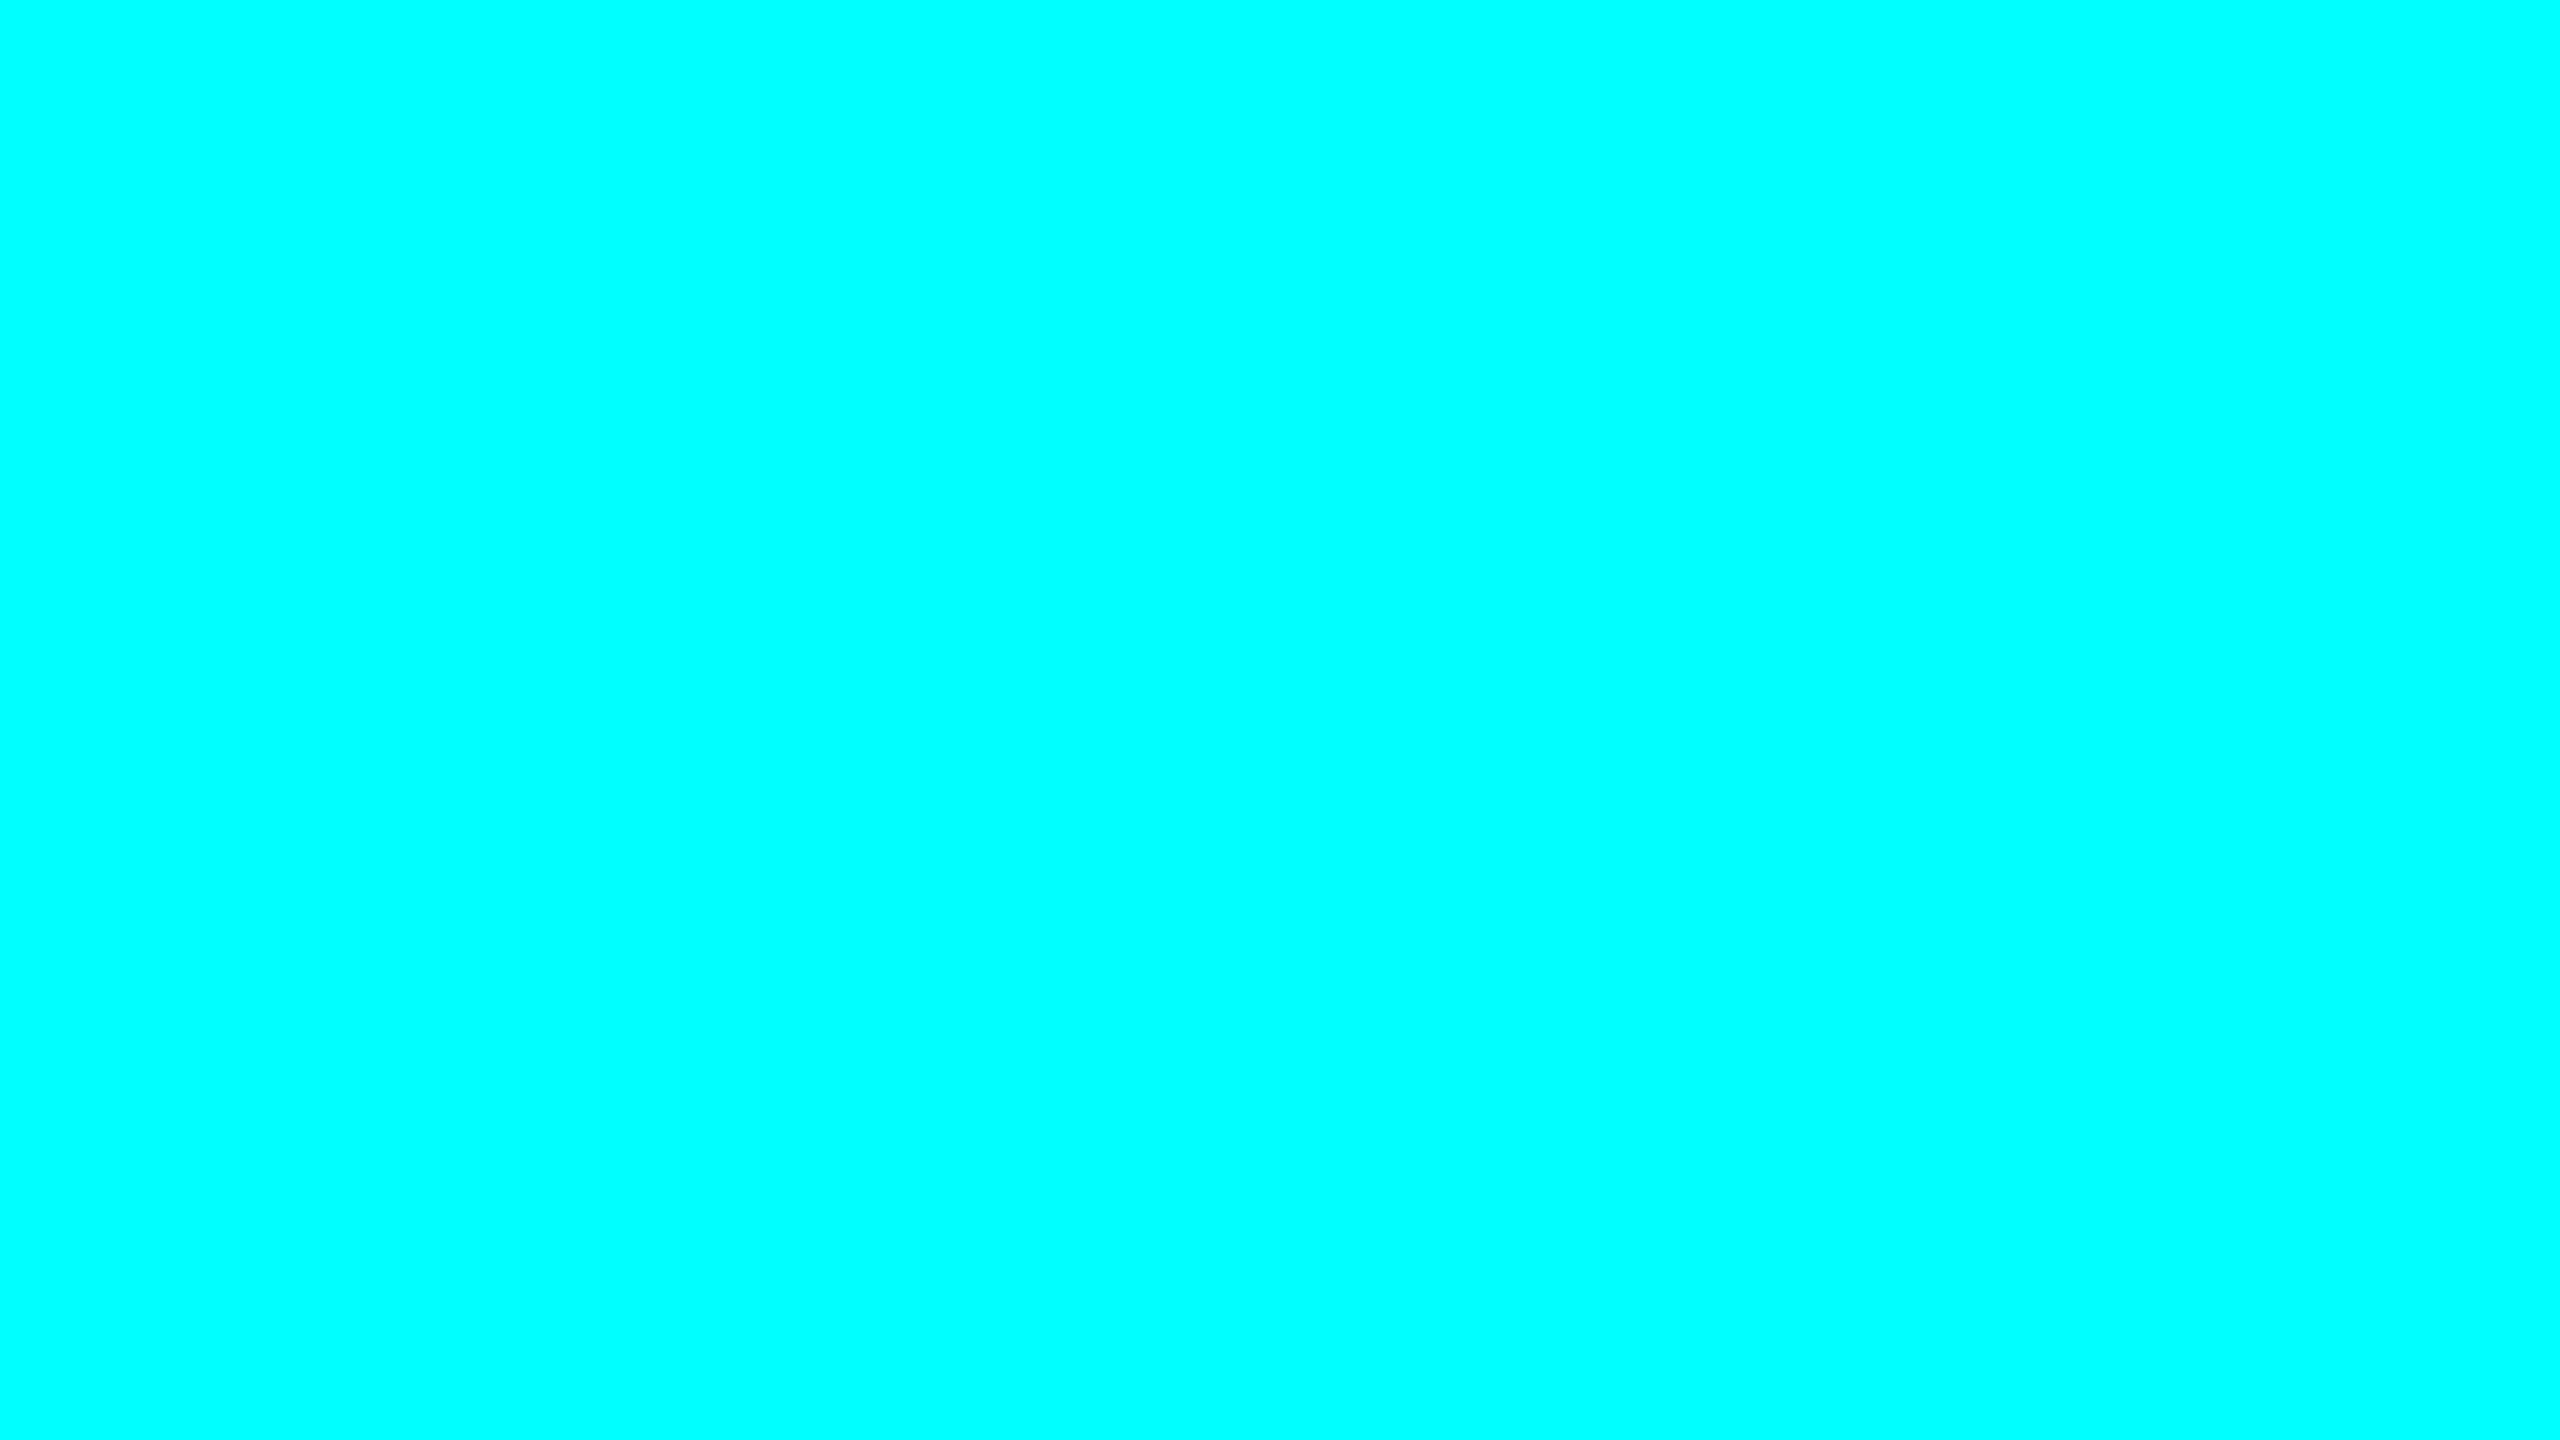 Free 2560x1440 resolution Cyan solid color background view and